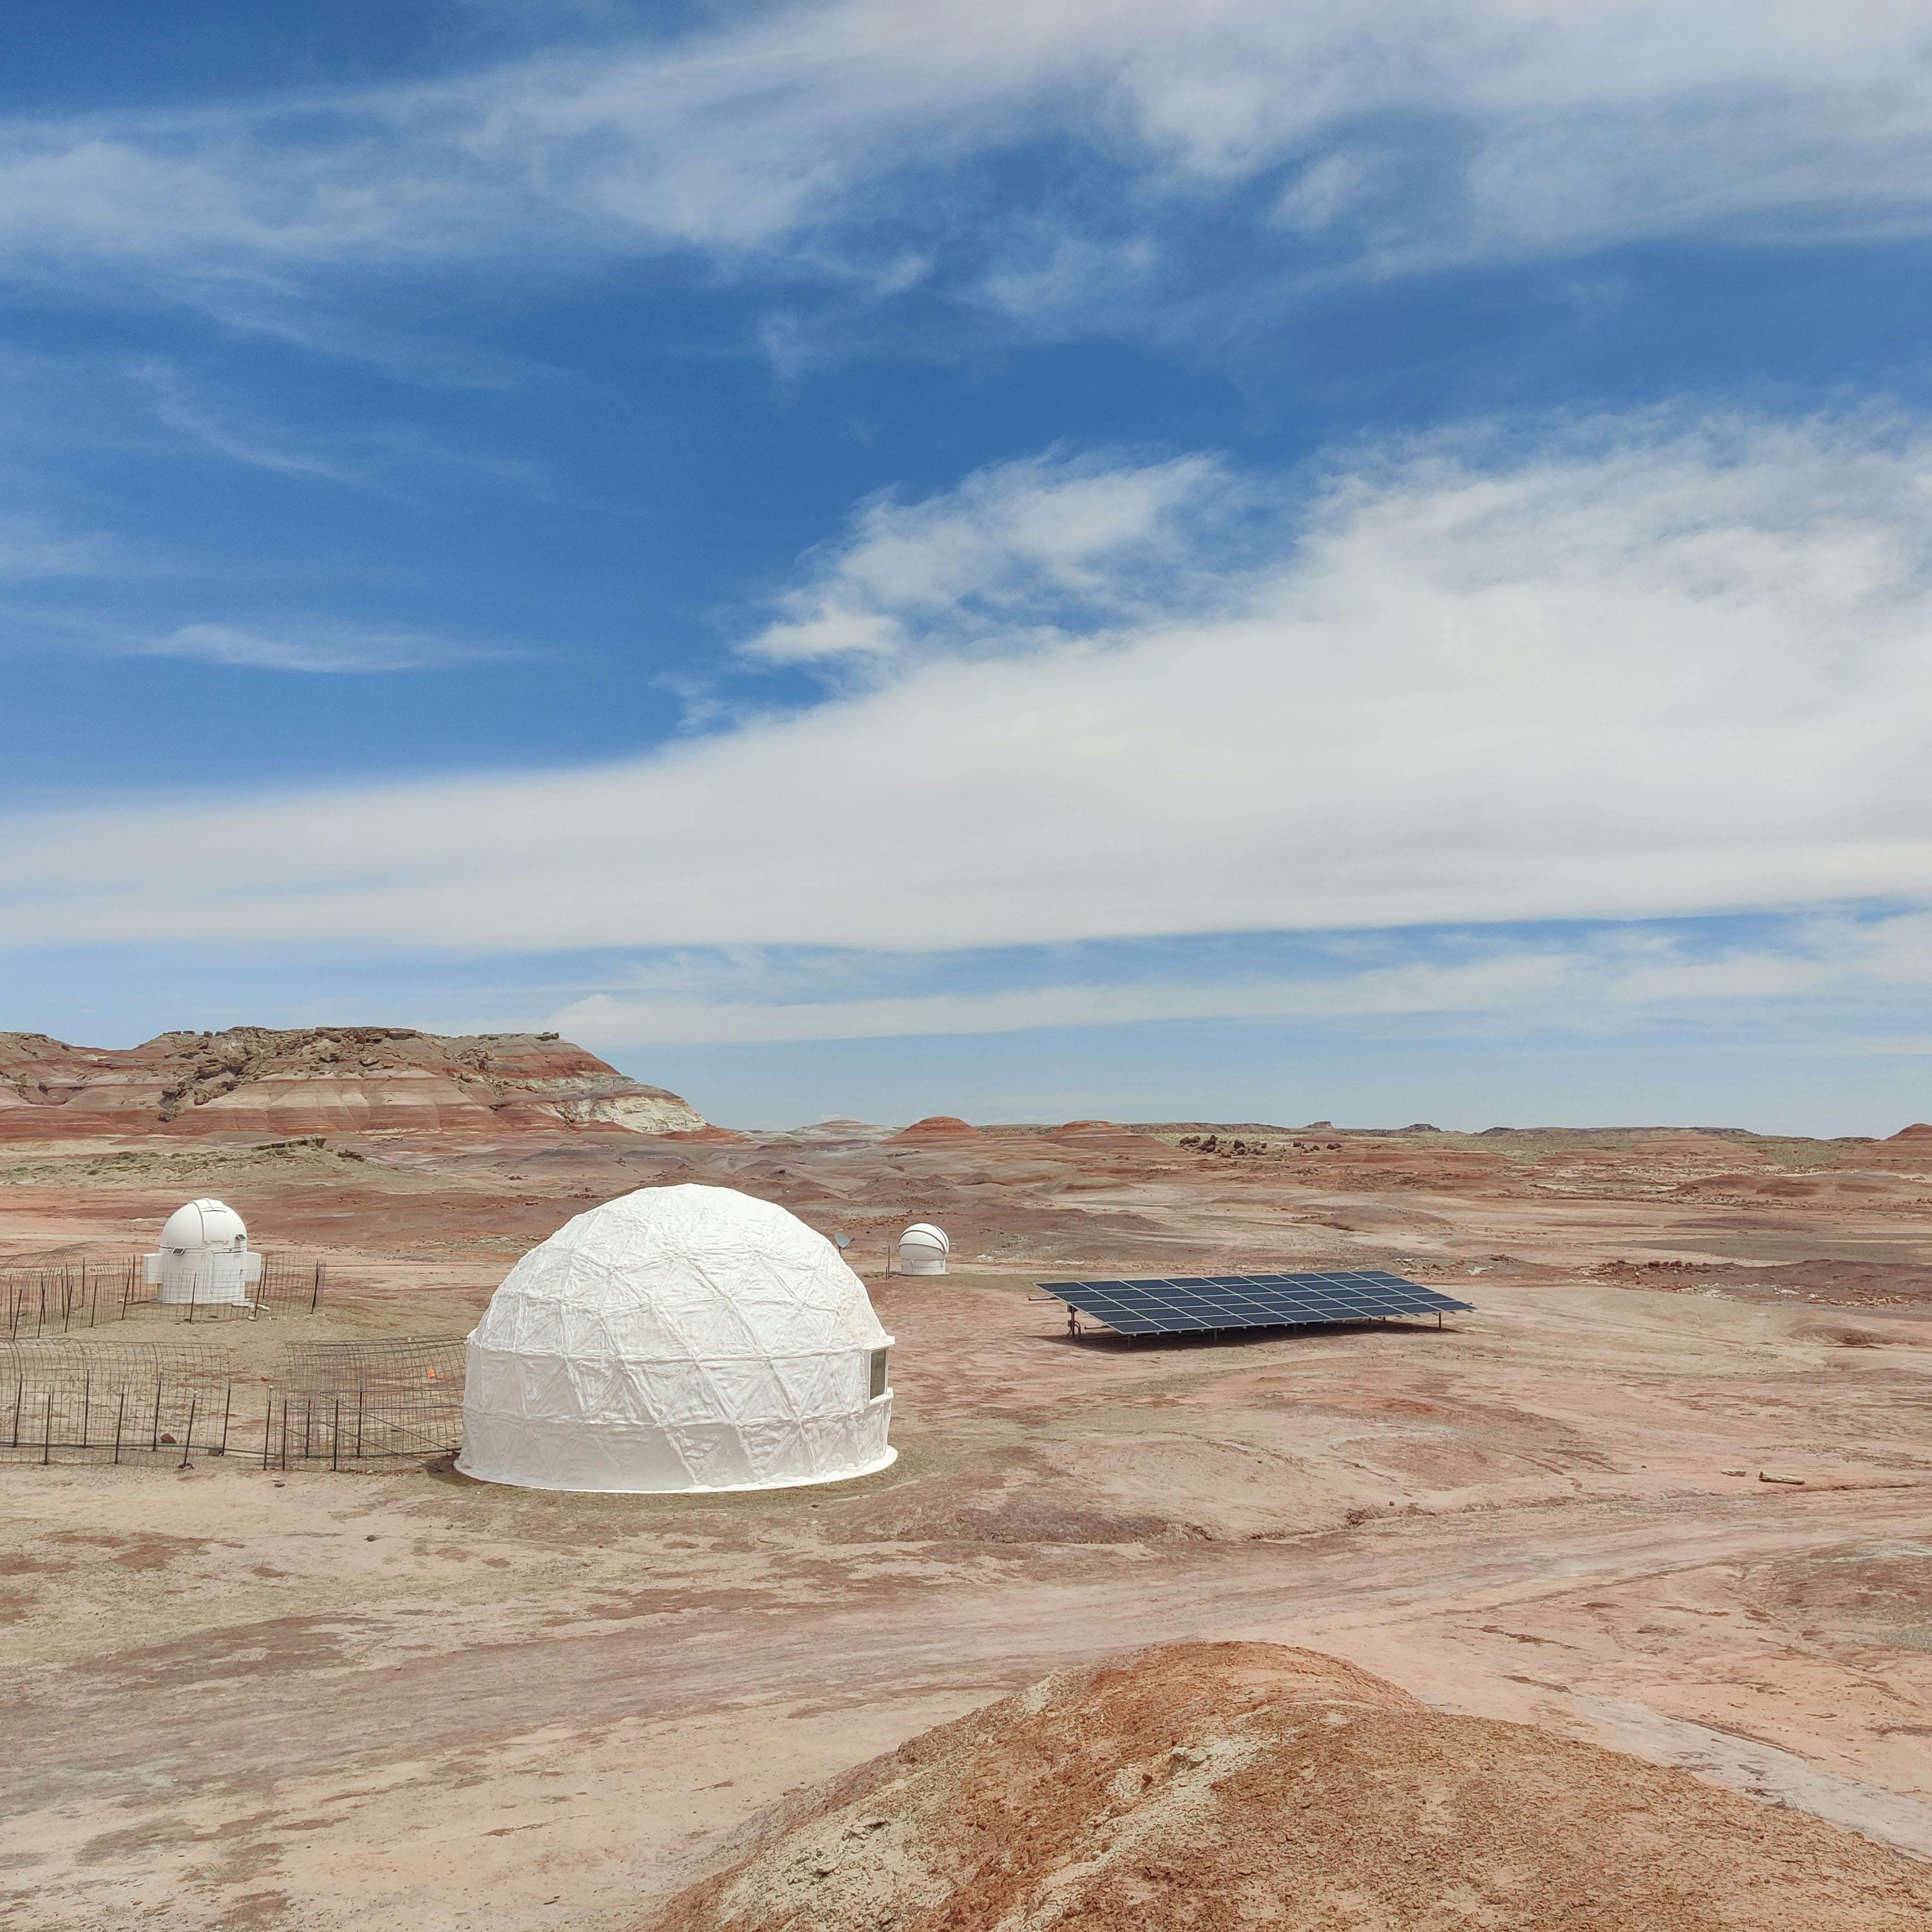 the hab domes! the competition was at a mars simulation facility, we got to go inside